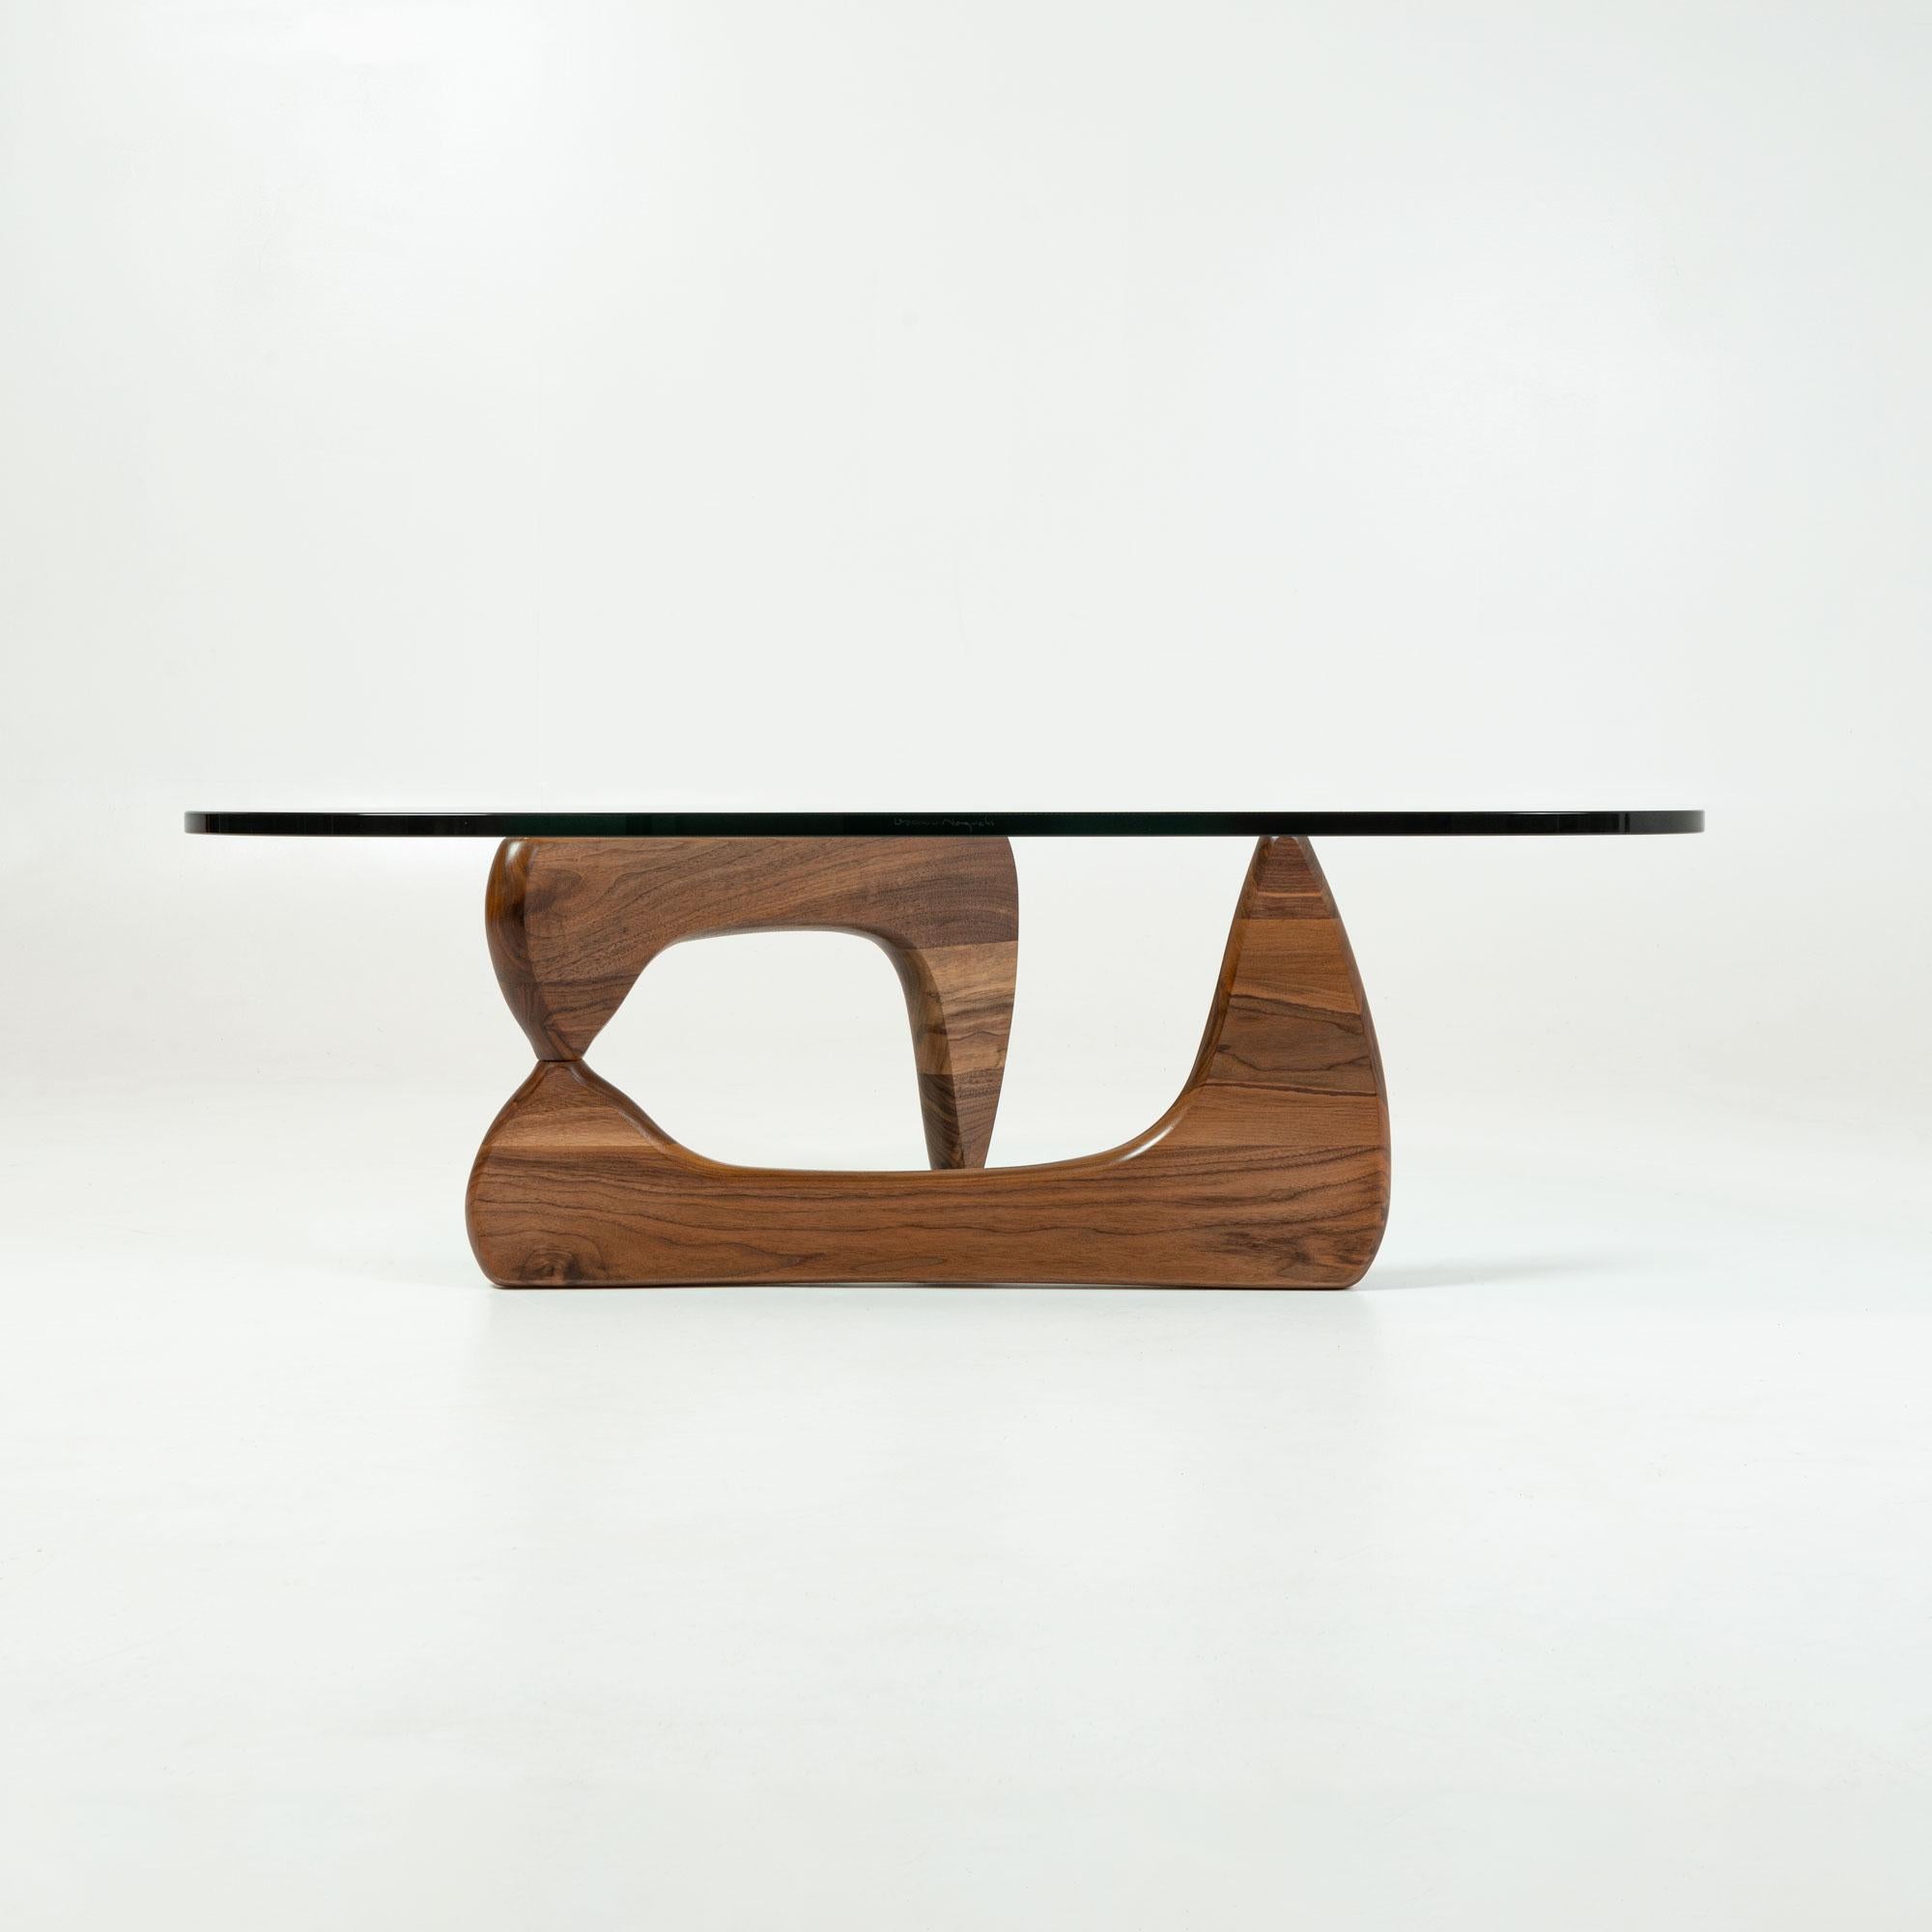 This original Noguchi Table (IN50) balances delicacy with sturdy, solid walnut construction in an understated yet unforgettable icon. The signature interlocking wood base offers a fresh perspective from every angle while the thick glass-top is made